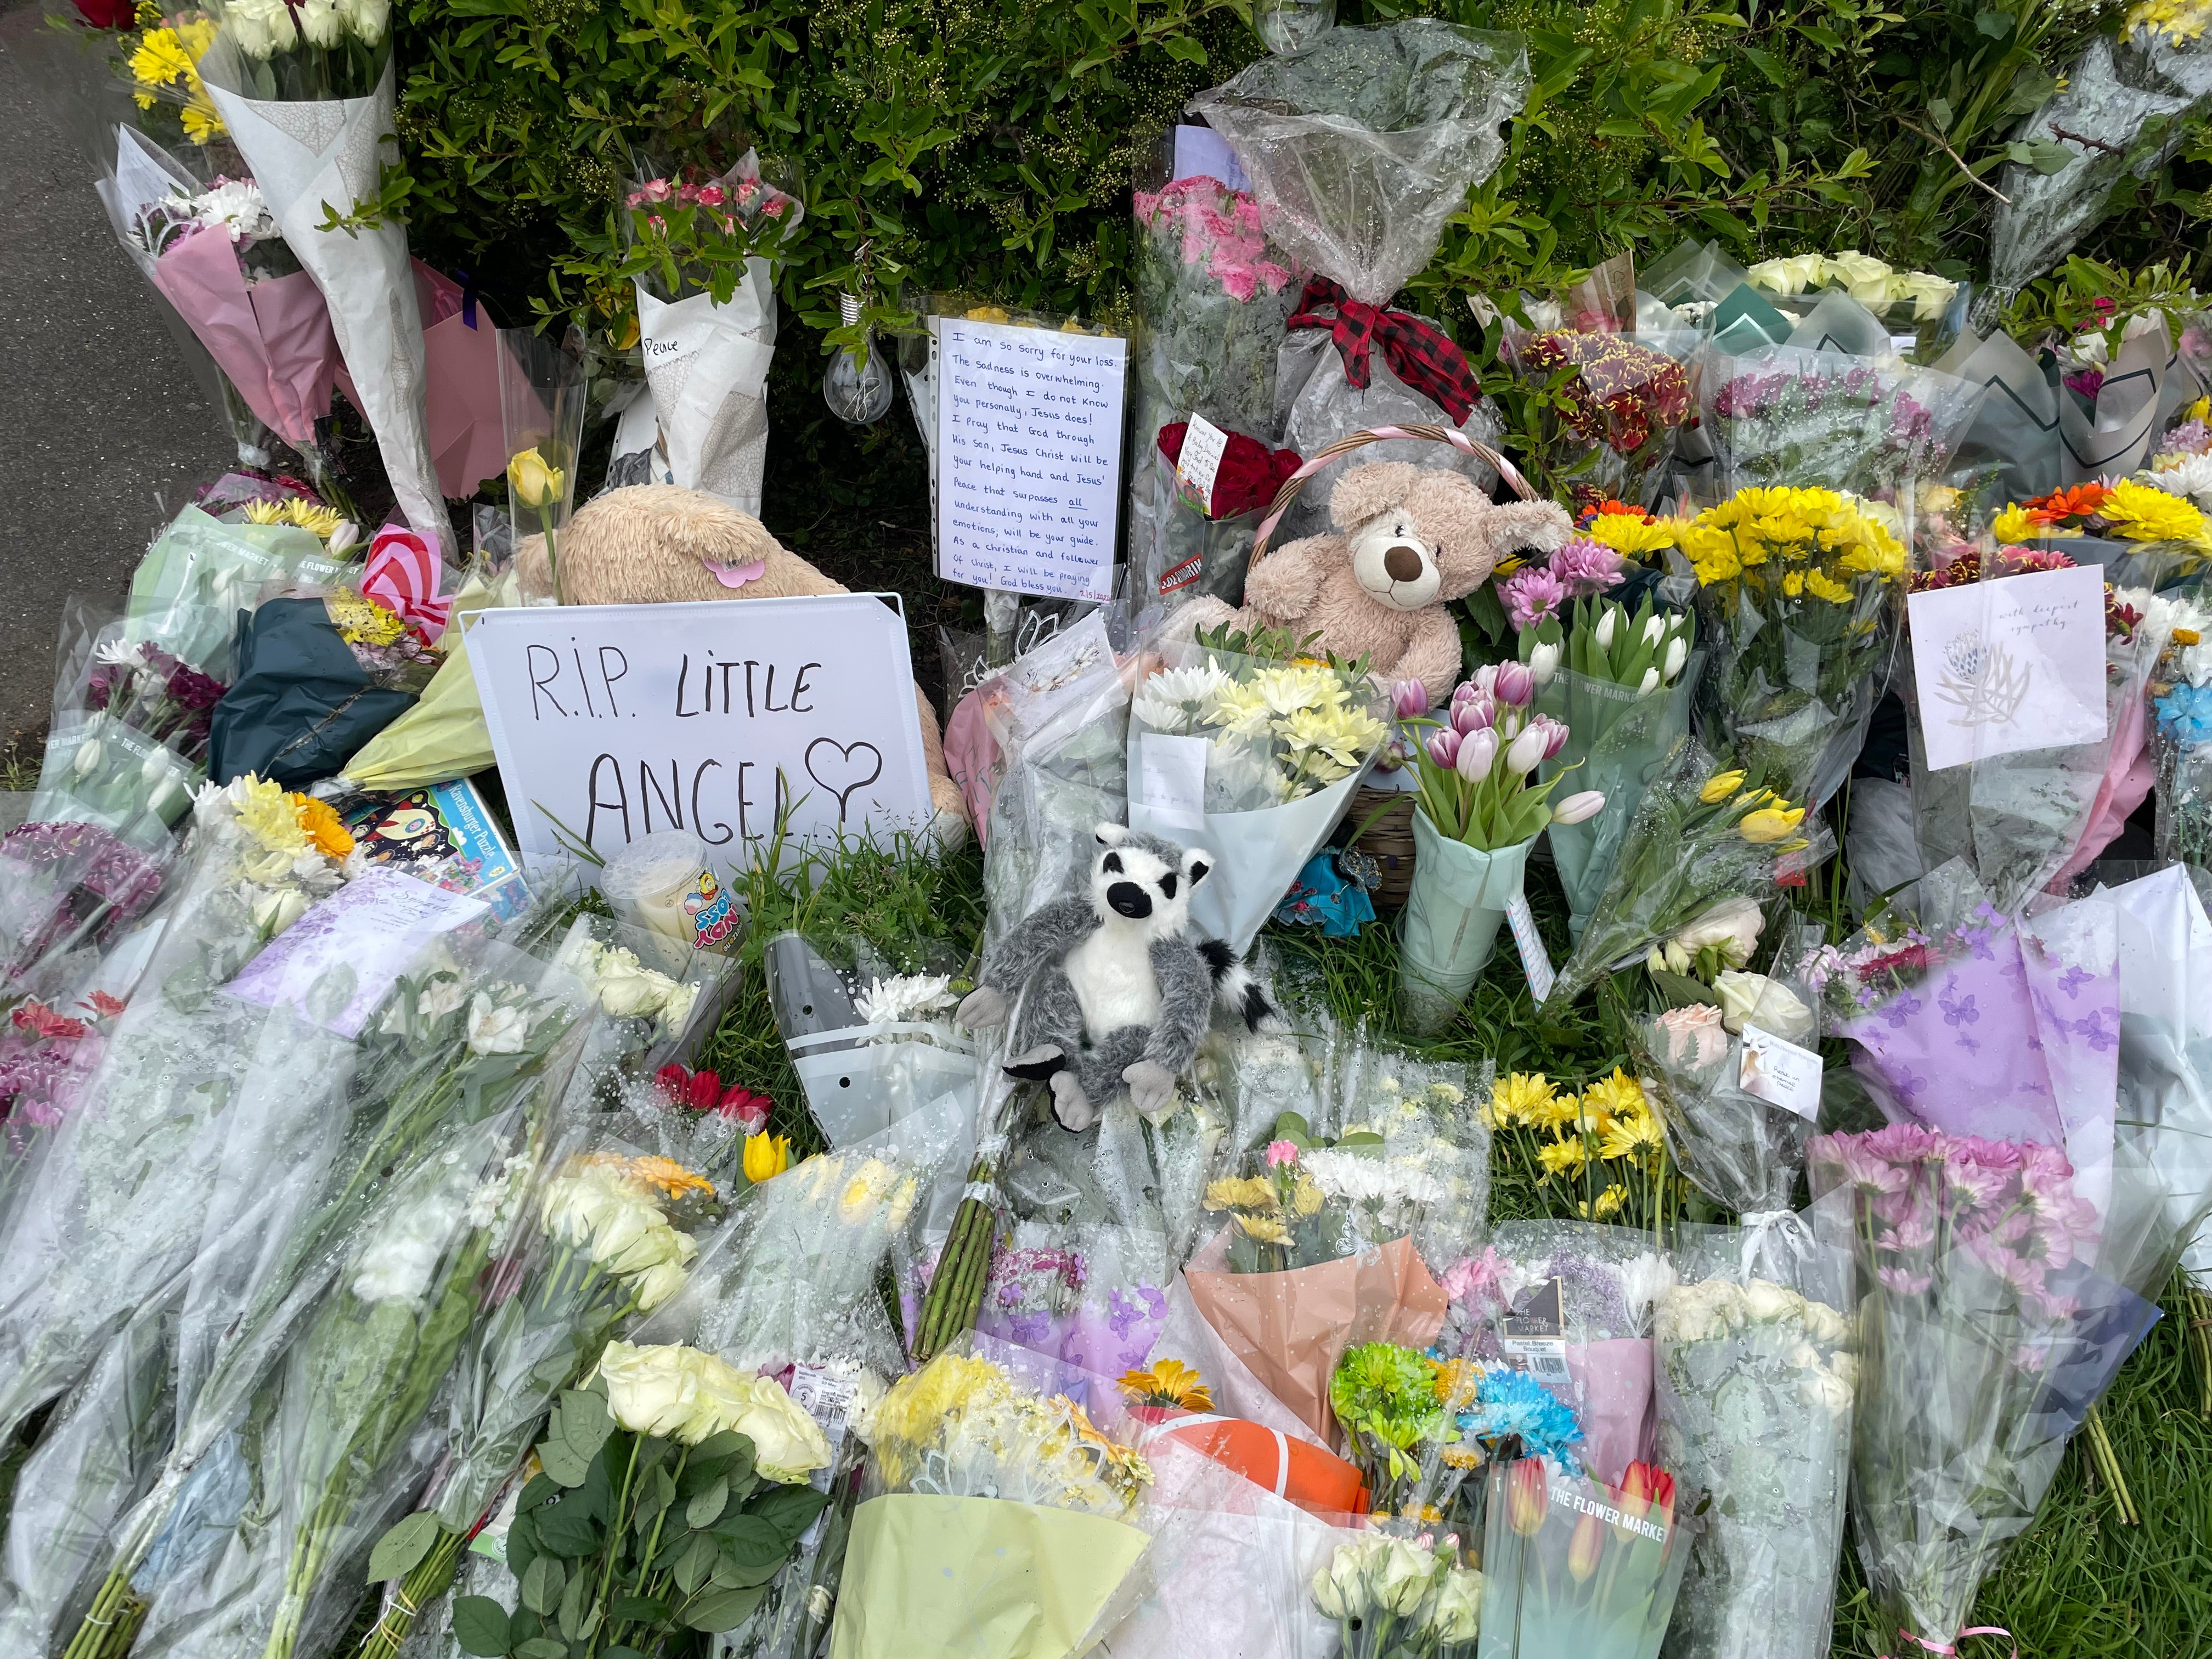 Floral tributes placed at the scene in Hainault